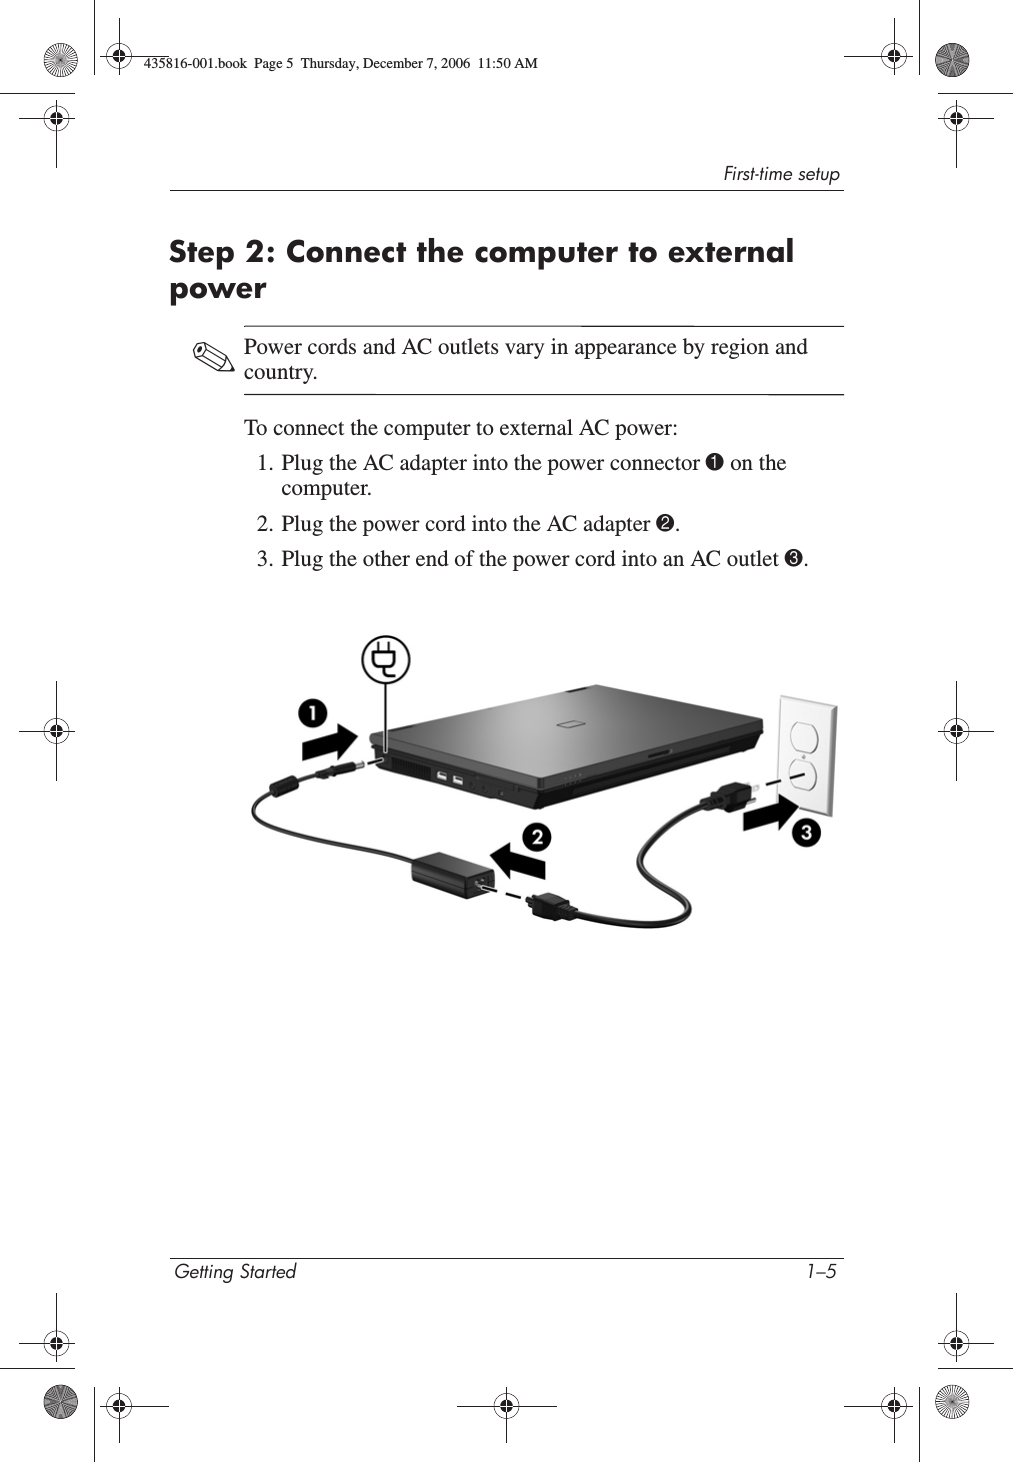 First-time setupGetting Started 1–5Step 2: Connect the computer to external power✎Power cords and AC outlets vary in appearance by region and country.To connect the computer to external AC power:1. Plug the AC adapter into the power connector 1 on the computer.2. Plug the power cord into the AC adapter 2.3. Plug the other end of the power cord into an AC outlet 3.435816-001.book  Page 5  Thursday, December 7, 2006  11:50 AM